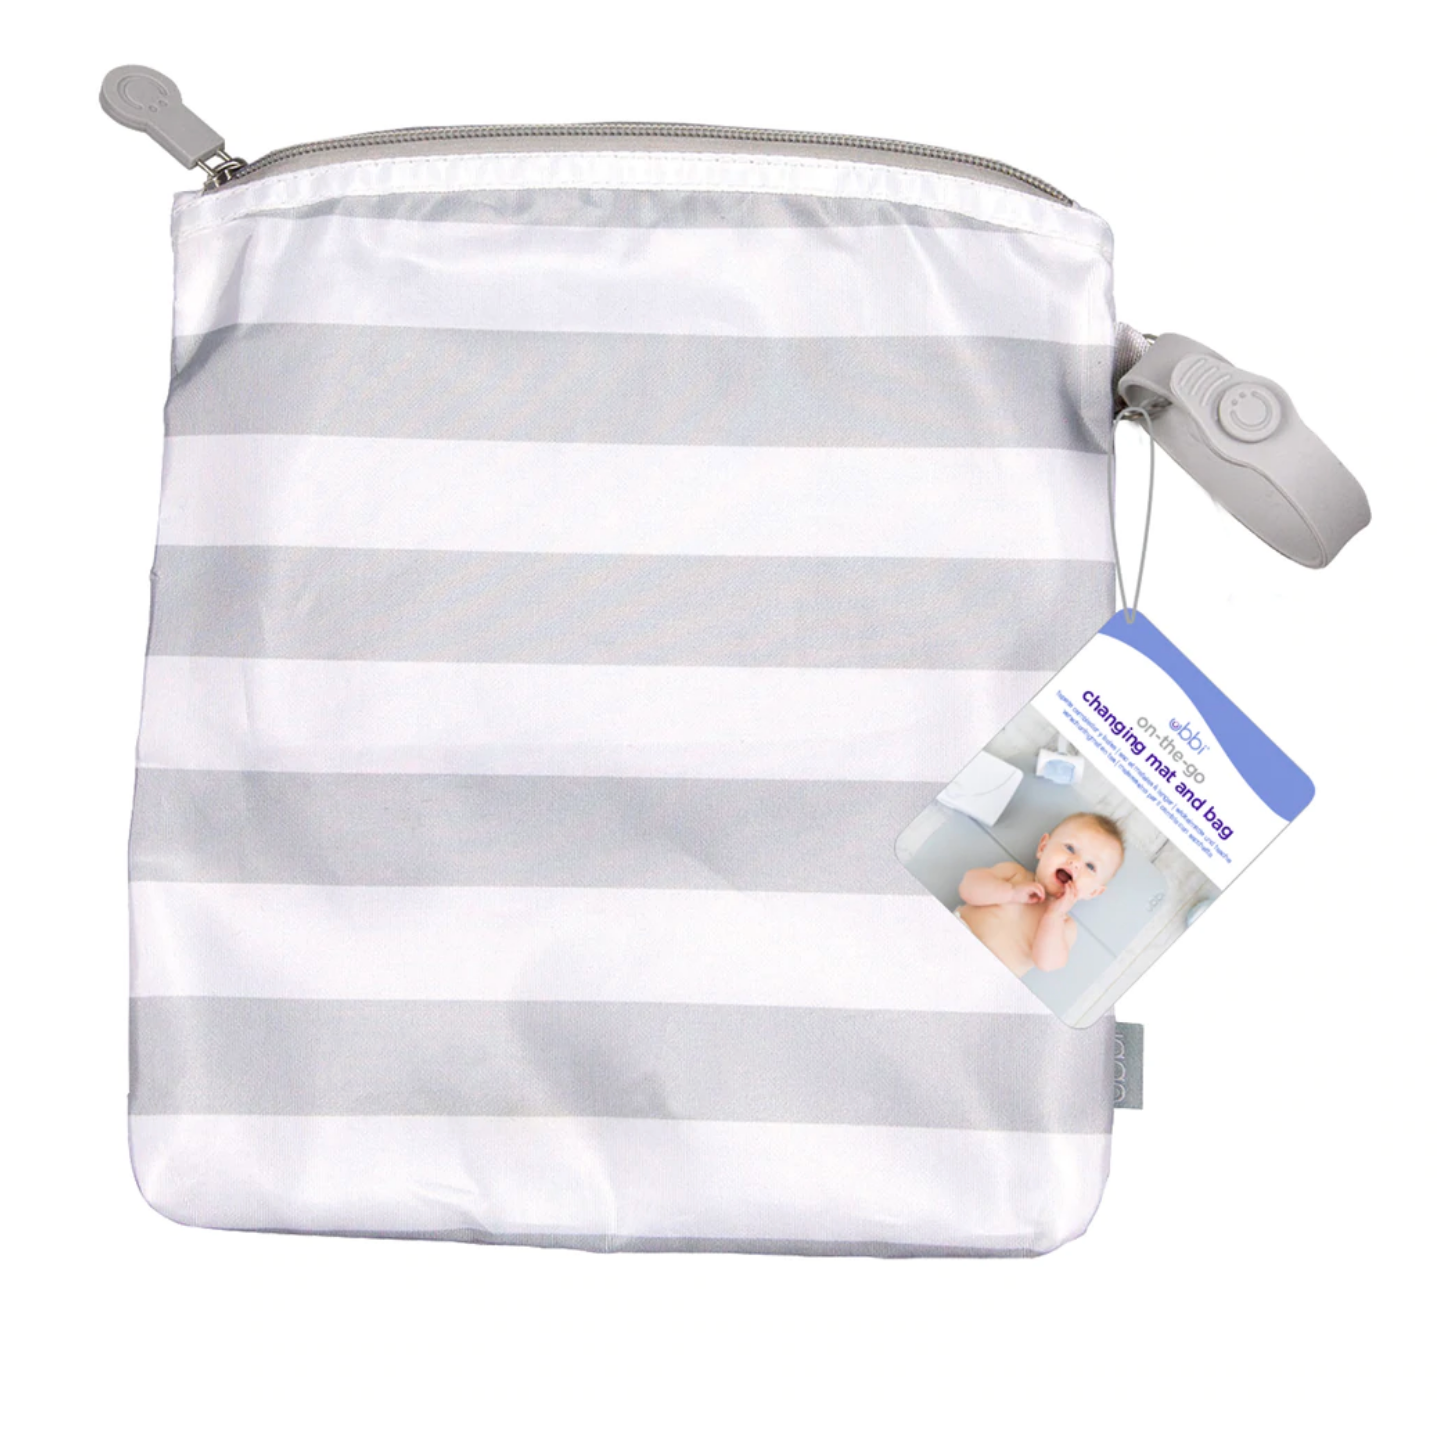 Ubbi on the go Changing Mat and Bag at Bonjour Baby Baskets